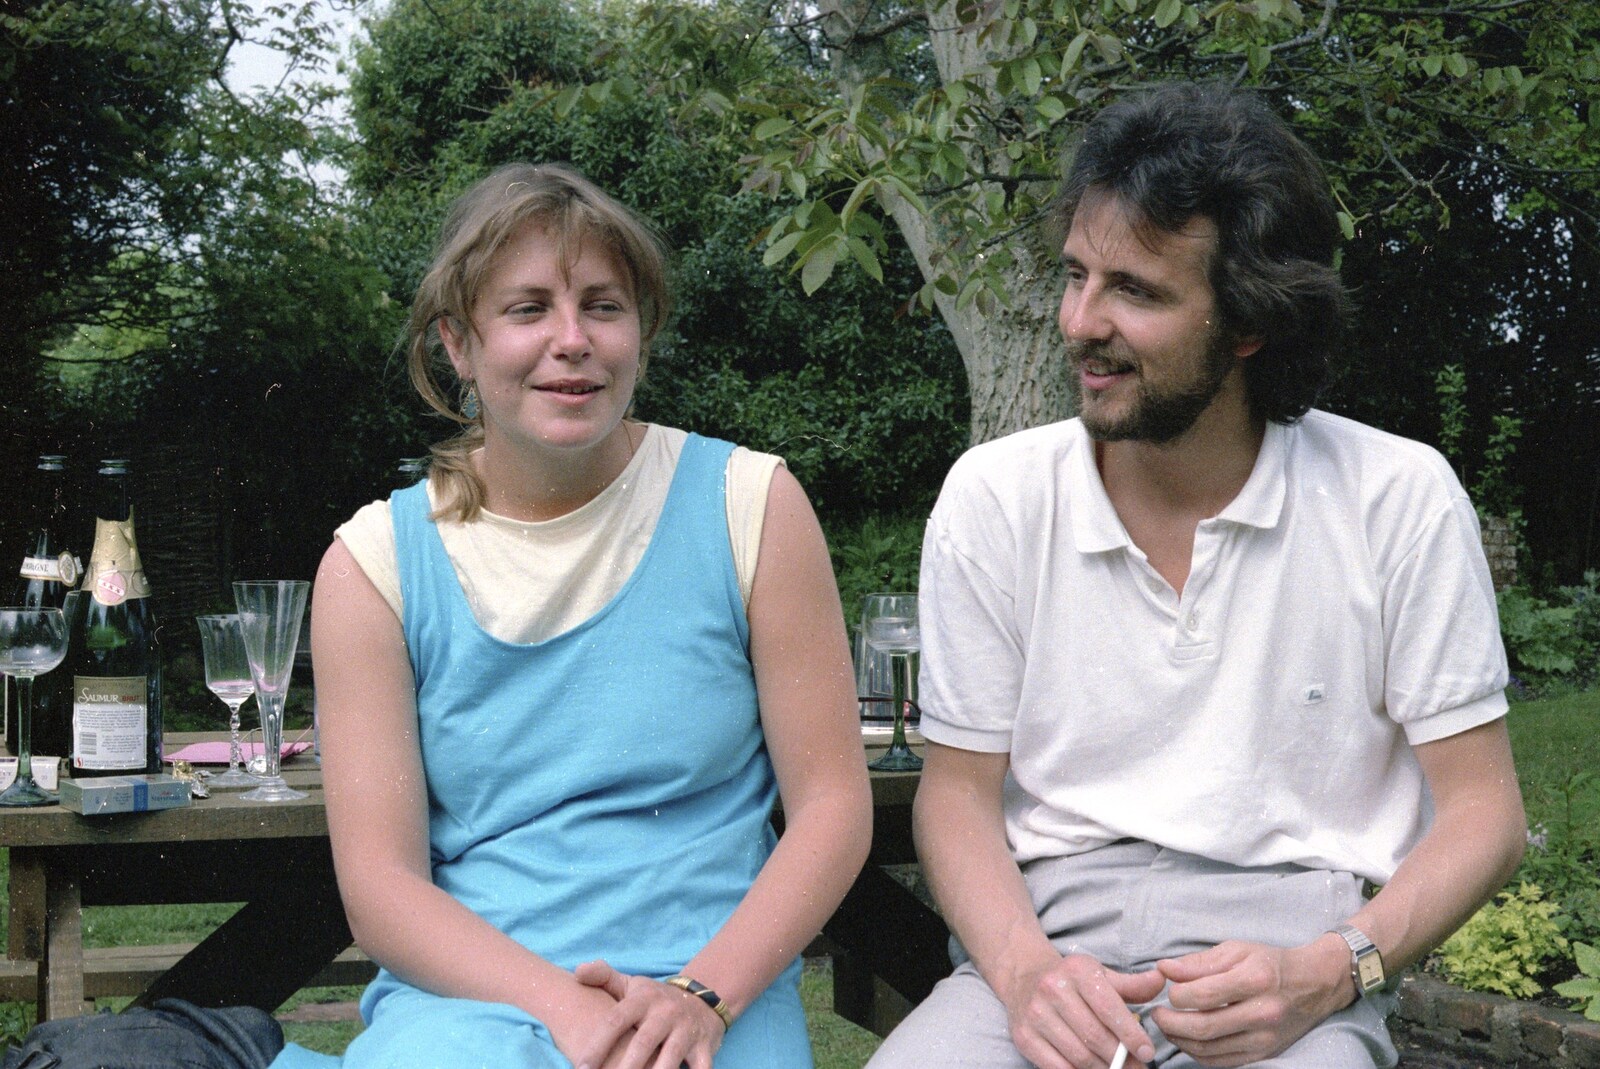 Clare Campbell and Martin Fairhurst from Nosher's 18th Birthday, Barton on Sea, Hampshire - 26th May 1985